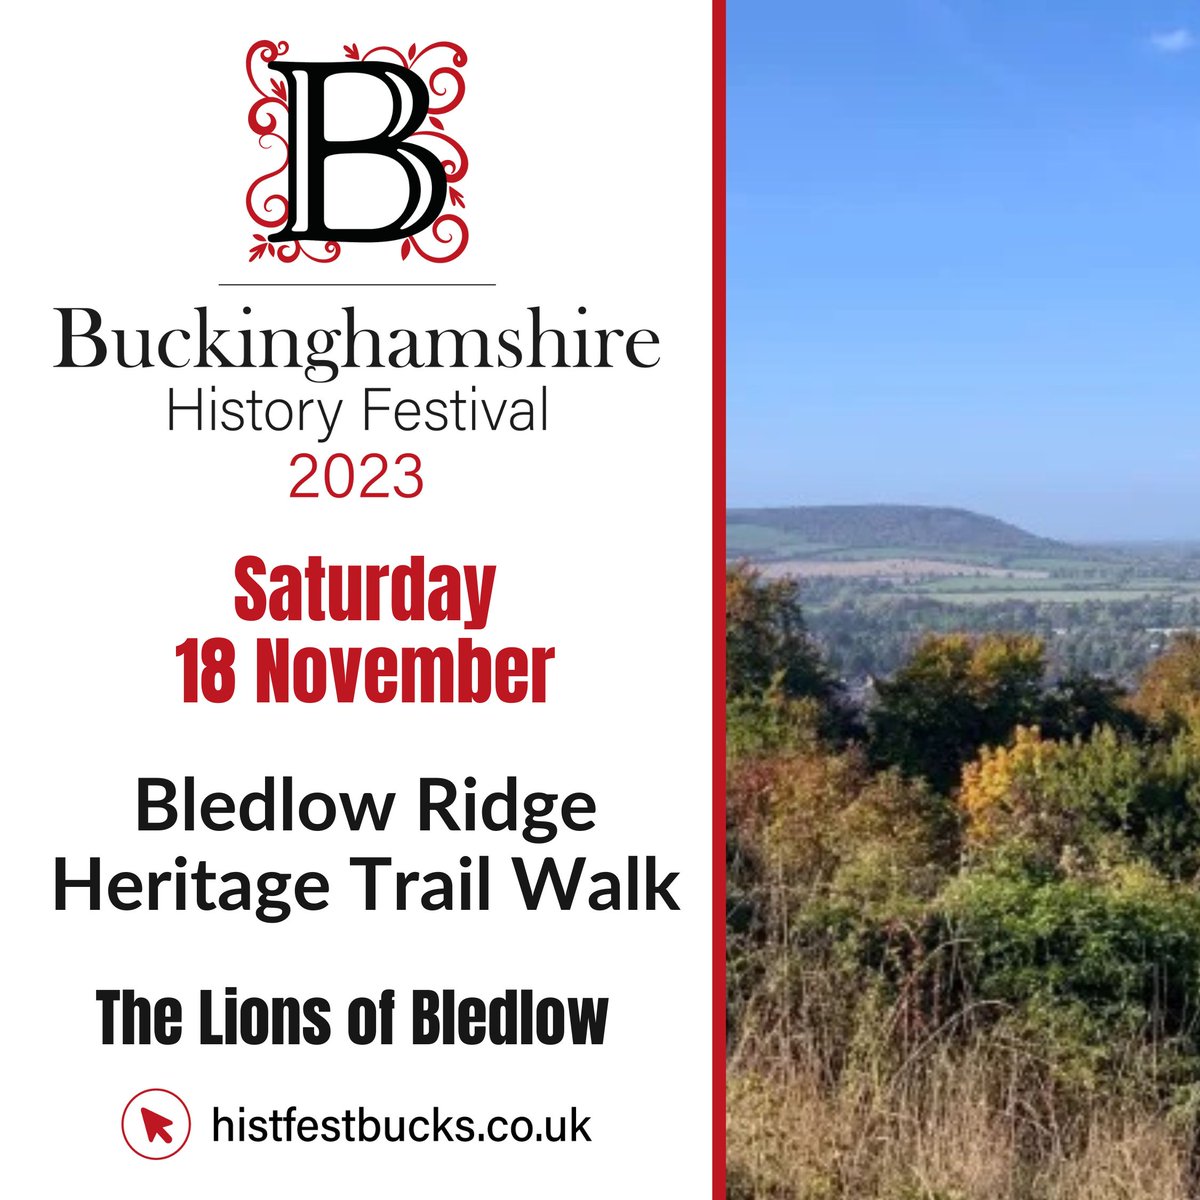 Don't forget! We've got a fantastic historic walk taking place this Saturday, all thanks to @ChilternsAONB! As you walk, you can learn all about the archaeological wonders hidden in our countryside.

Book your tickets here: bookwhen.com/ccb/e/ev-sjhi-…